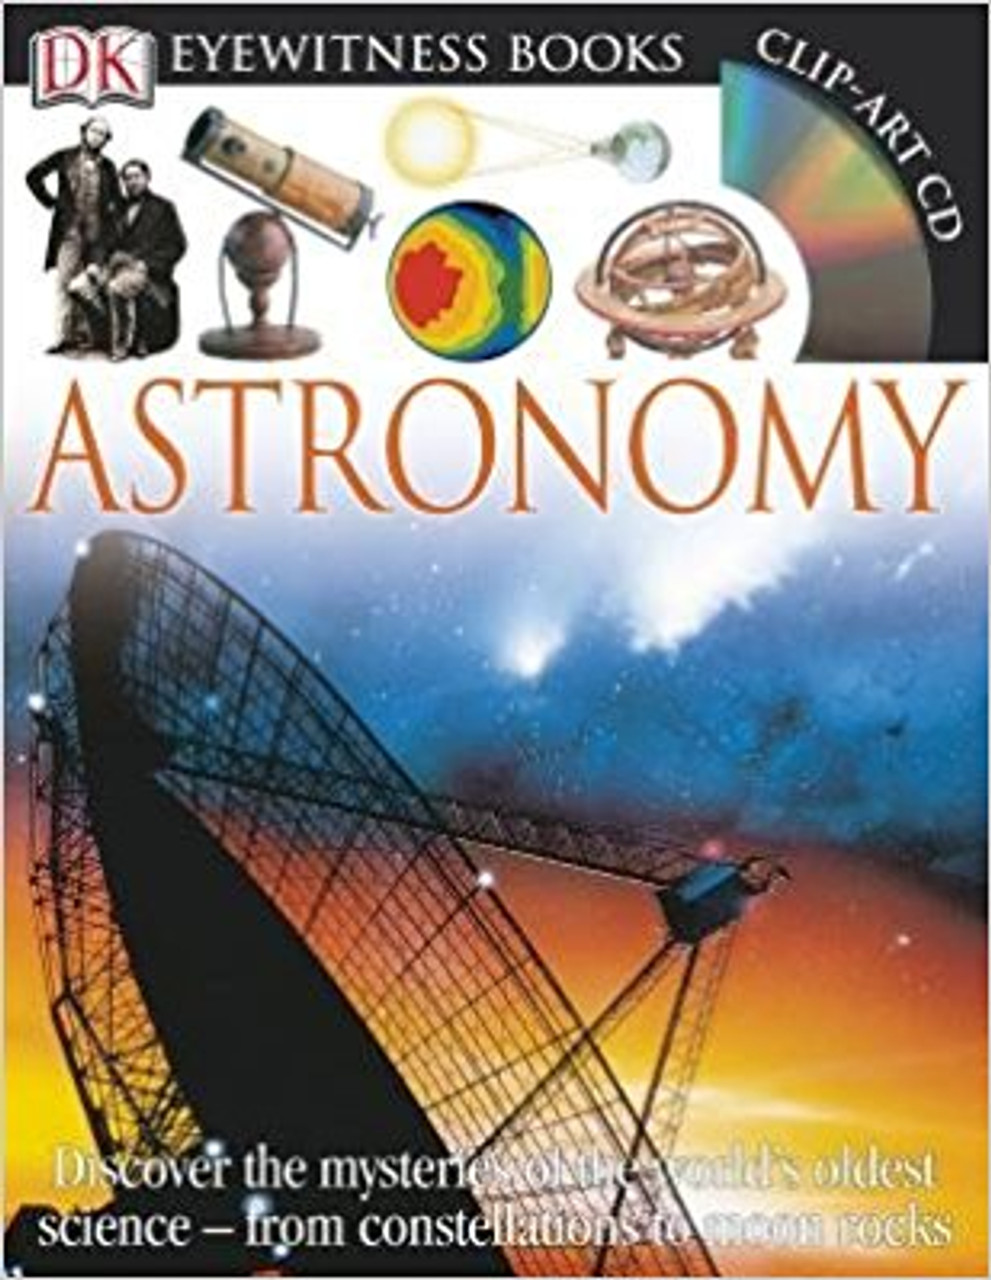 Astronomy [With CD-Rom and Poster] by Kristen Lippincott